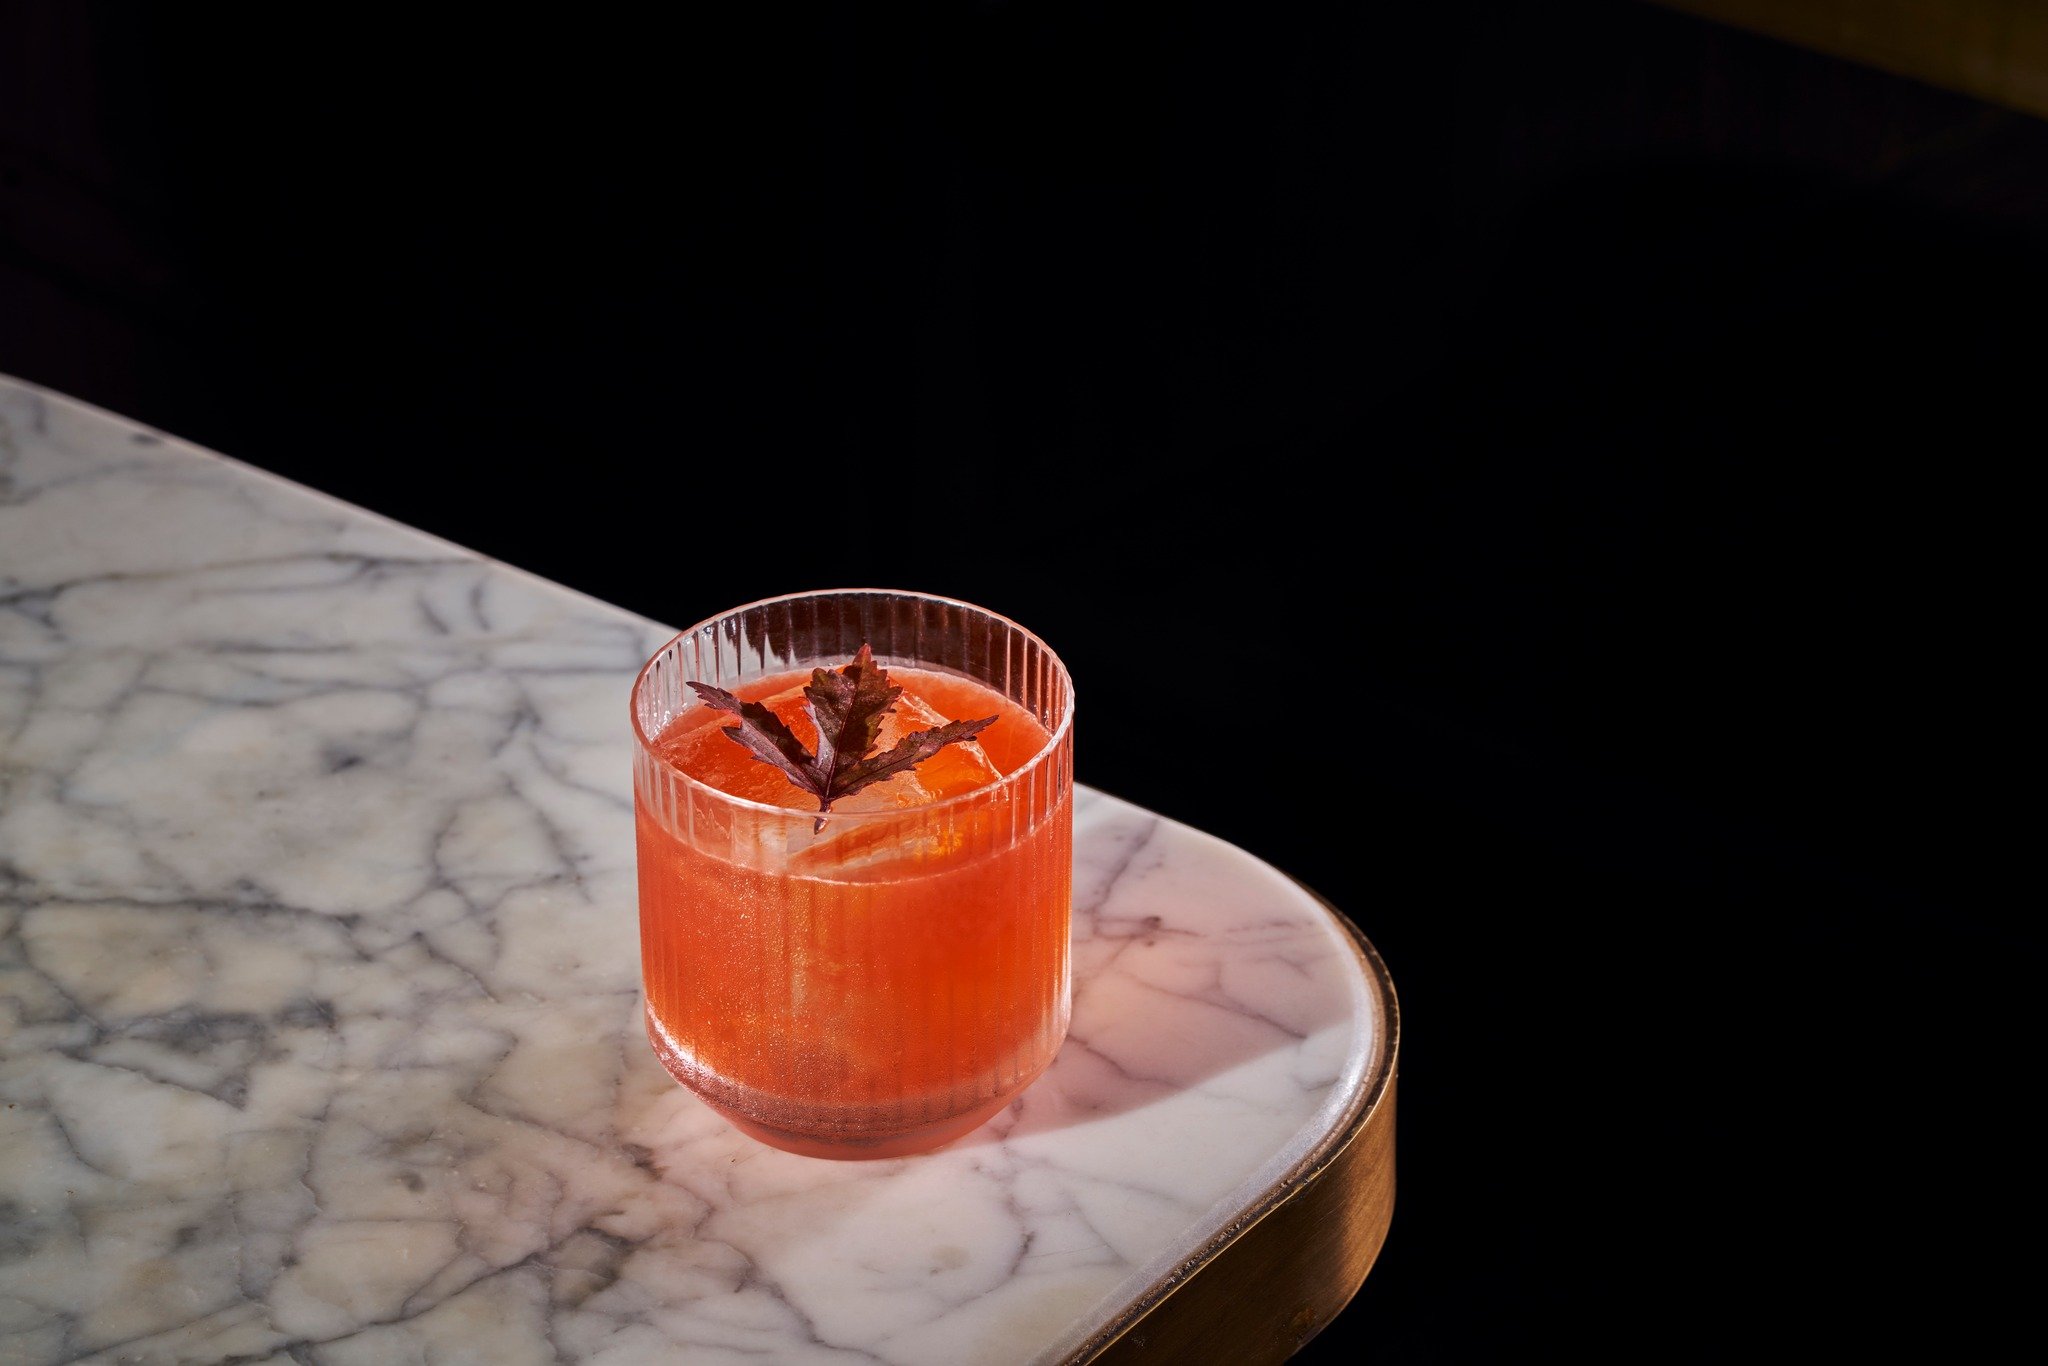 Have you tried our Urban Farmer No. 4?

A beautifully hued cocktail crafted with Stranger &amp; Sons Gin, Nardini Rabarbaro, Muyu Jasmine Verte, cranberry hibiscus, and a medley of fruits. It's a juicy, tart, and citrusy delight.

Join us during Happ